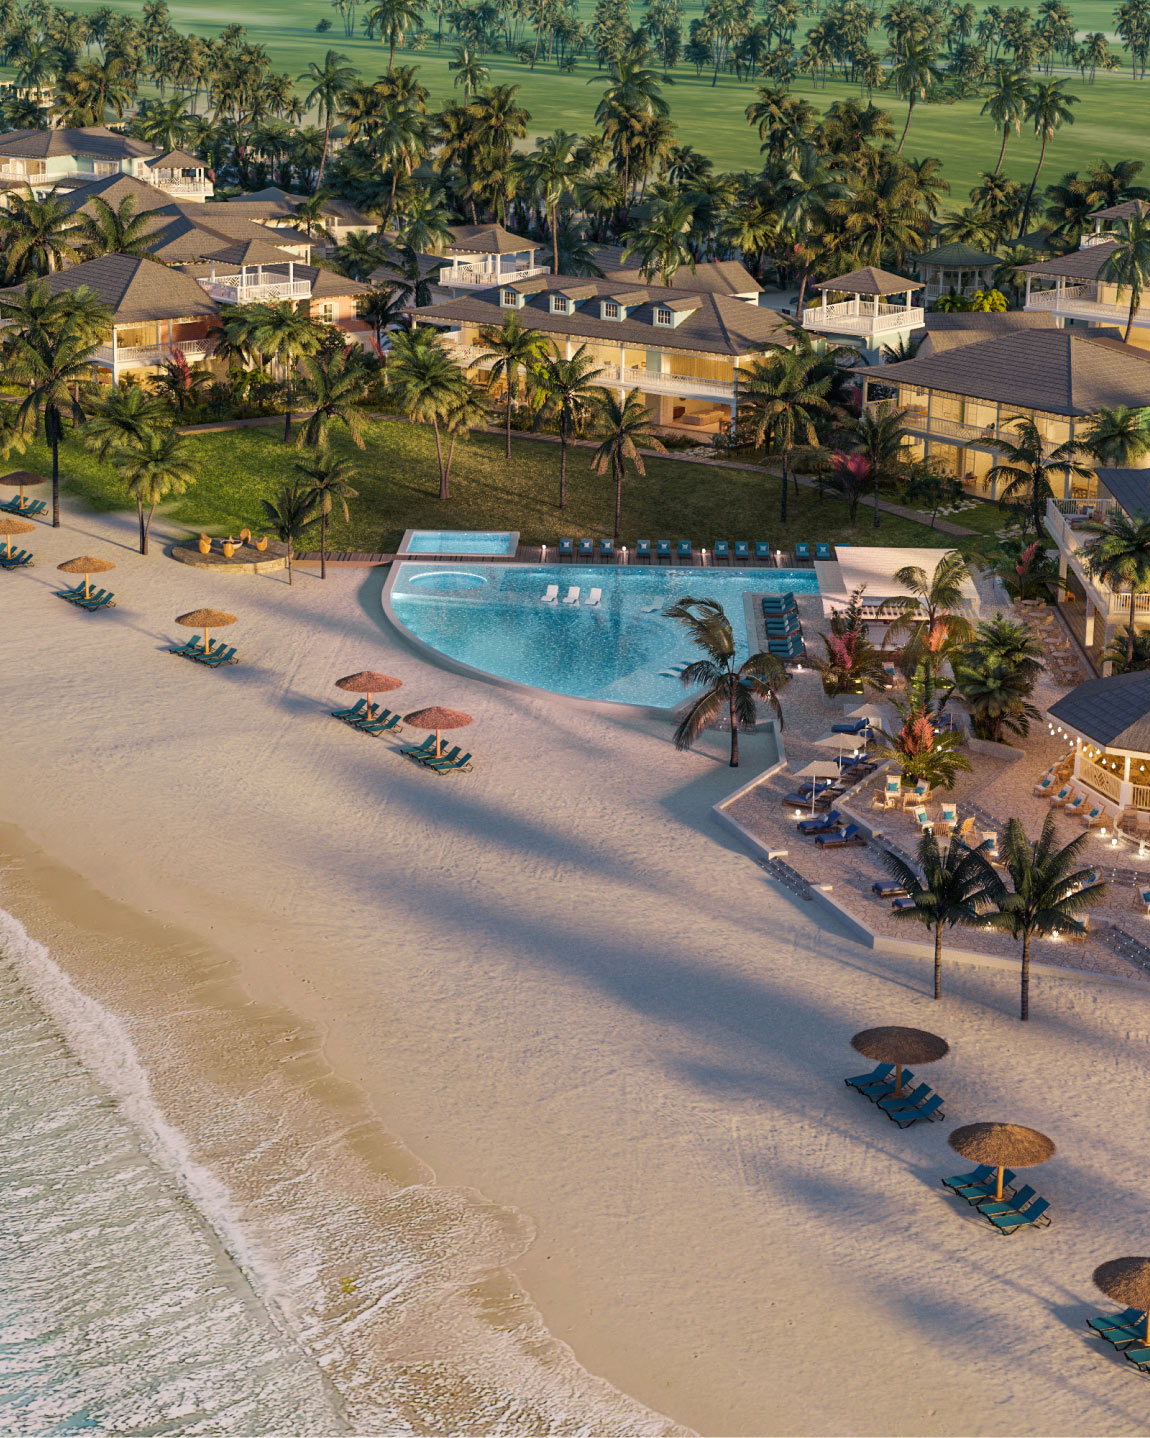 Rendering of The Bay Club at The Abaco Club